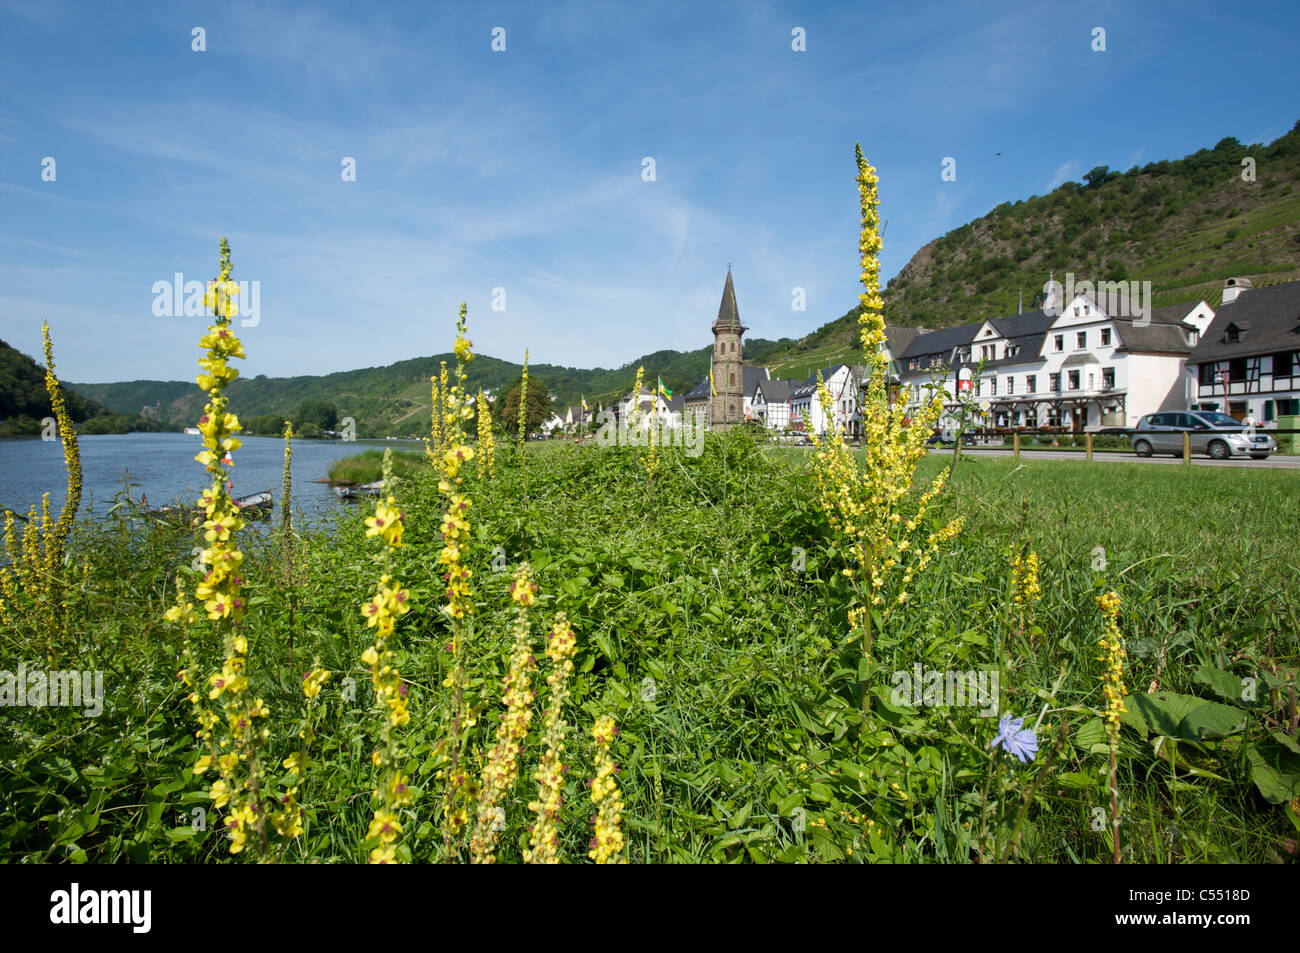 Moselle river and the town of Hatzenport with yellow flowers, Rhineland-Palatinate, Germany Stock Photo